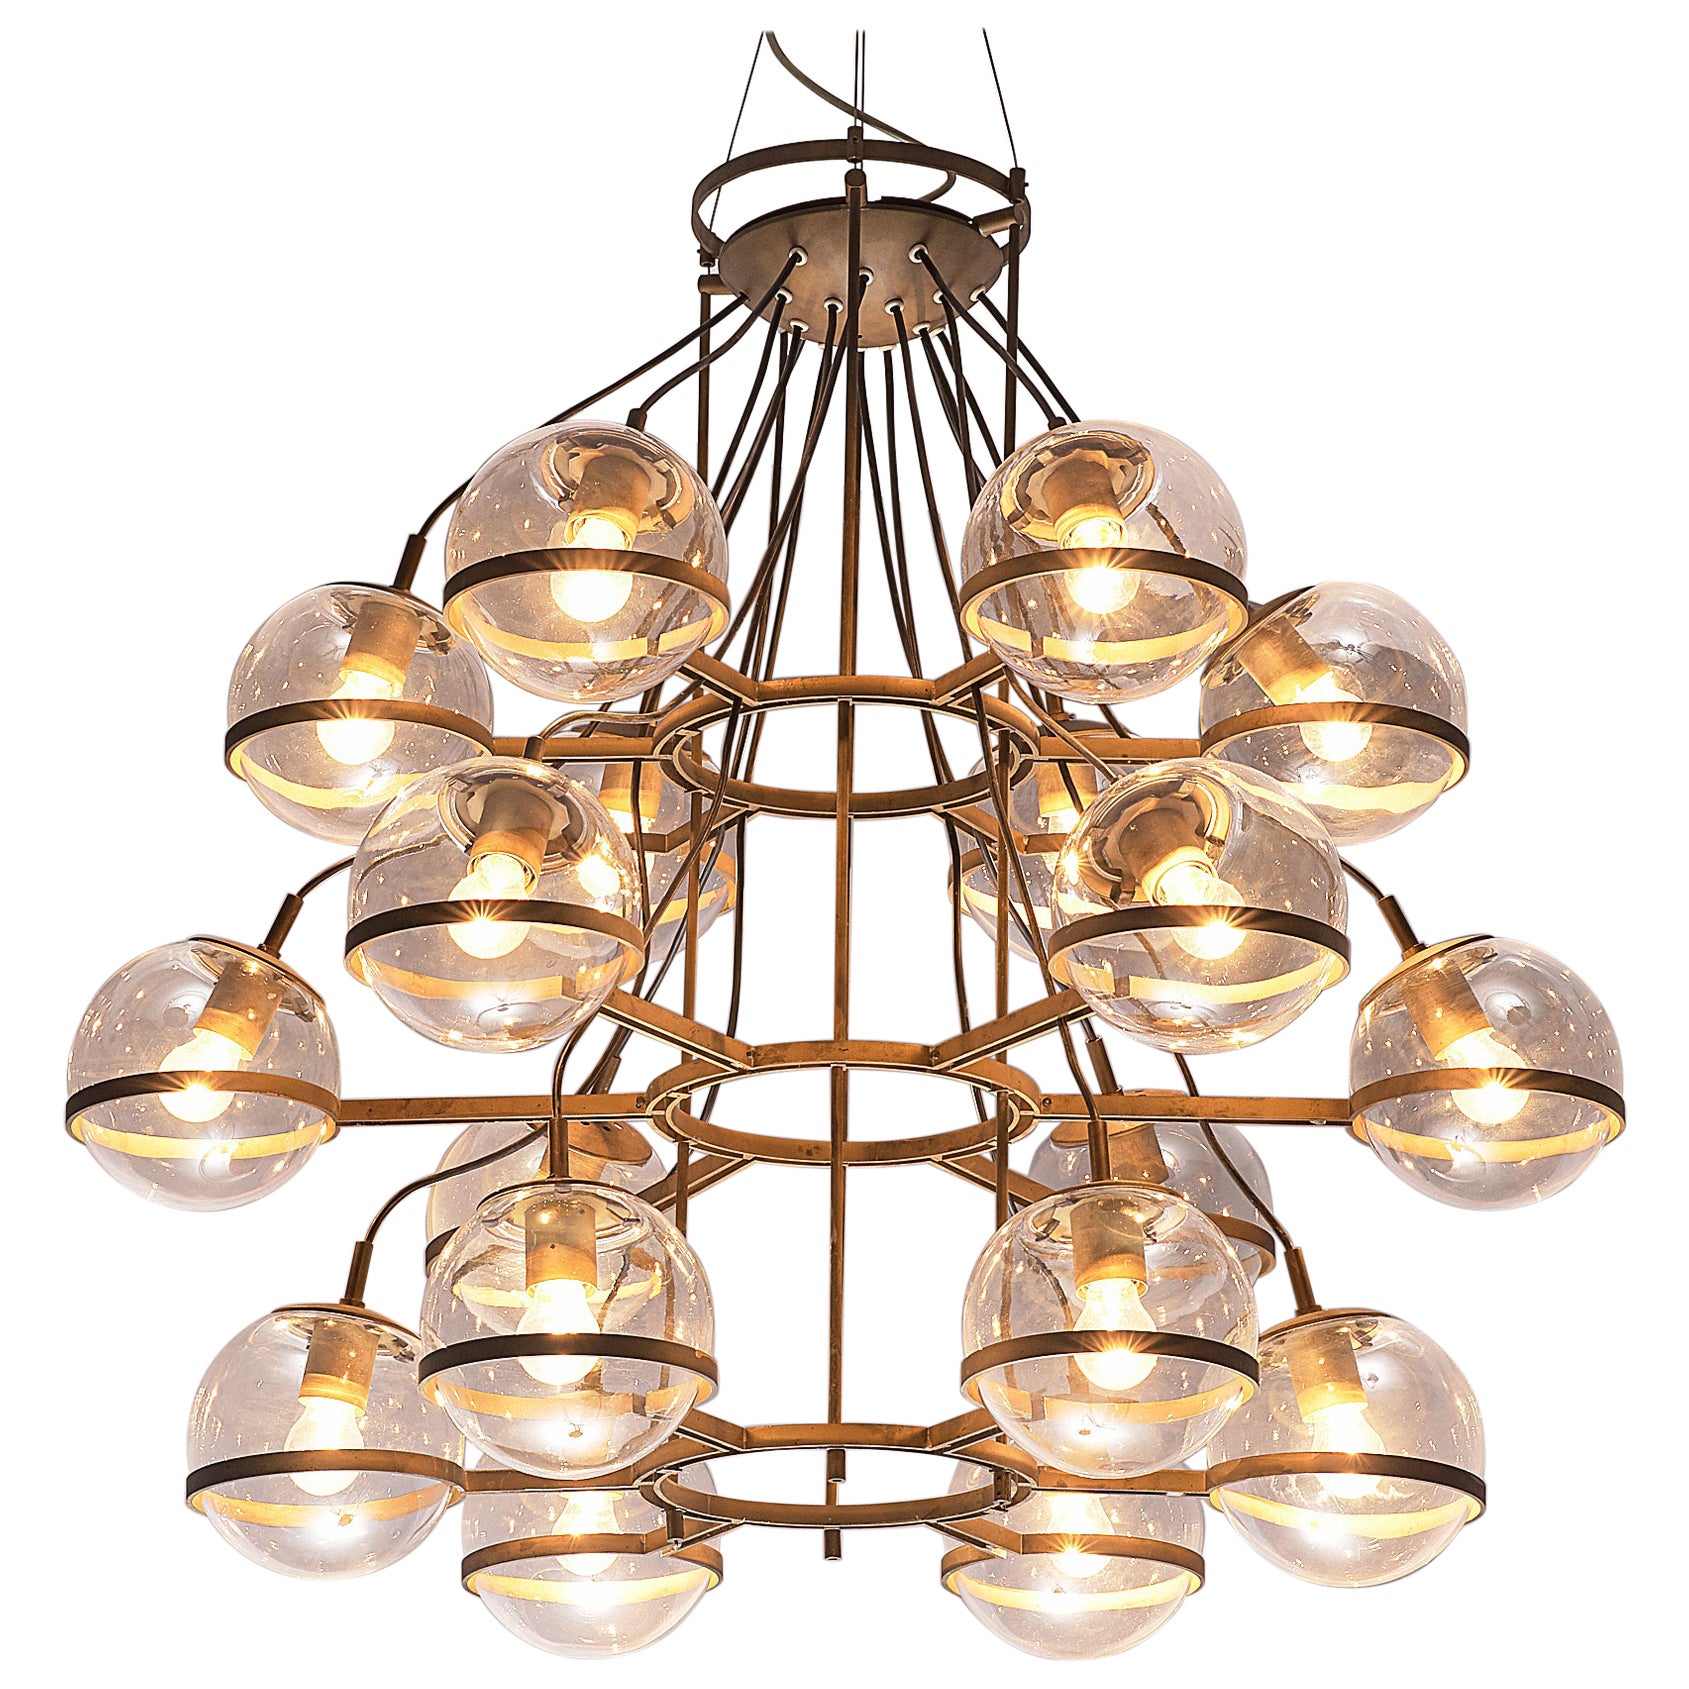 Listing for C: Two large Large French Chandeliers in Brass and Glass